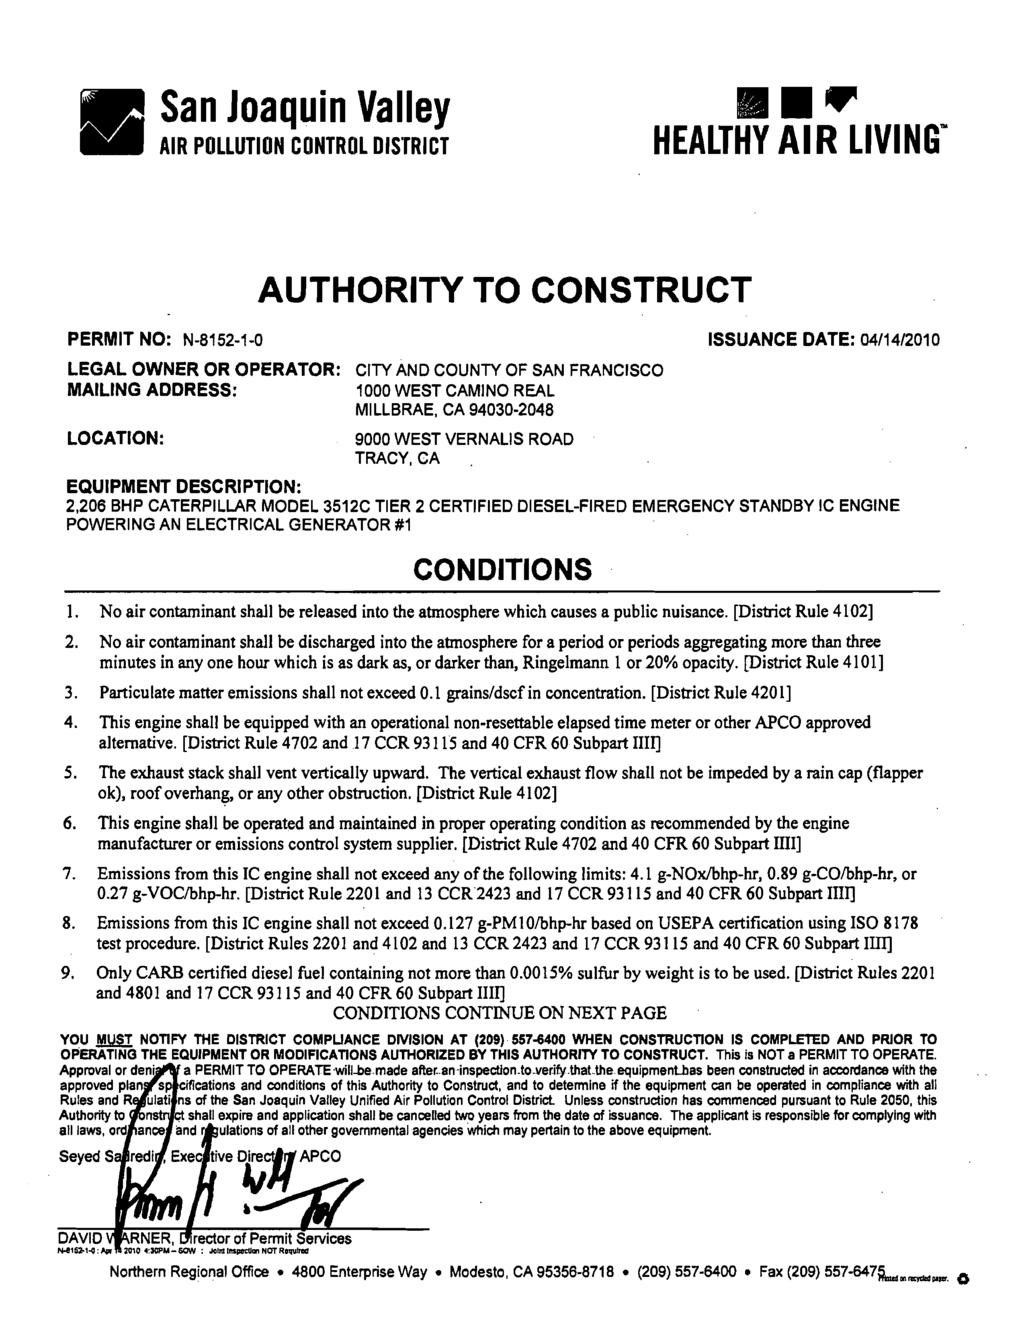 8.r.l HEALTHY AIR LIVINGm AUTHORITY TO CONSTRUCT PERMIT NO: N-8752-1-0 ISSUANCE DATE: 04/14/2010 LEGAL OWNER OR OPERATOR: CITY AND COUNTY OF SAN FRANCISCO MAILING ADDRESS: 1000 WEST CAMlNO REAL